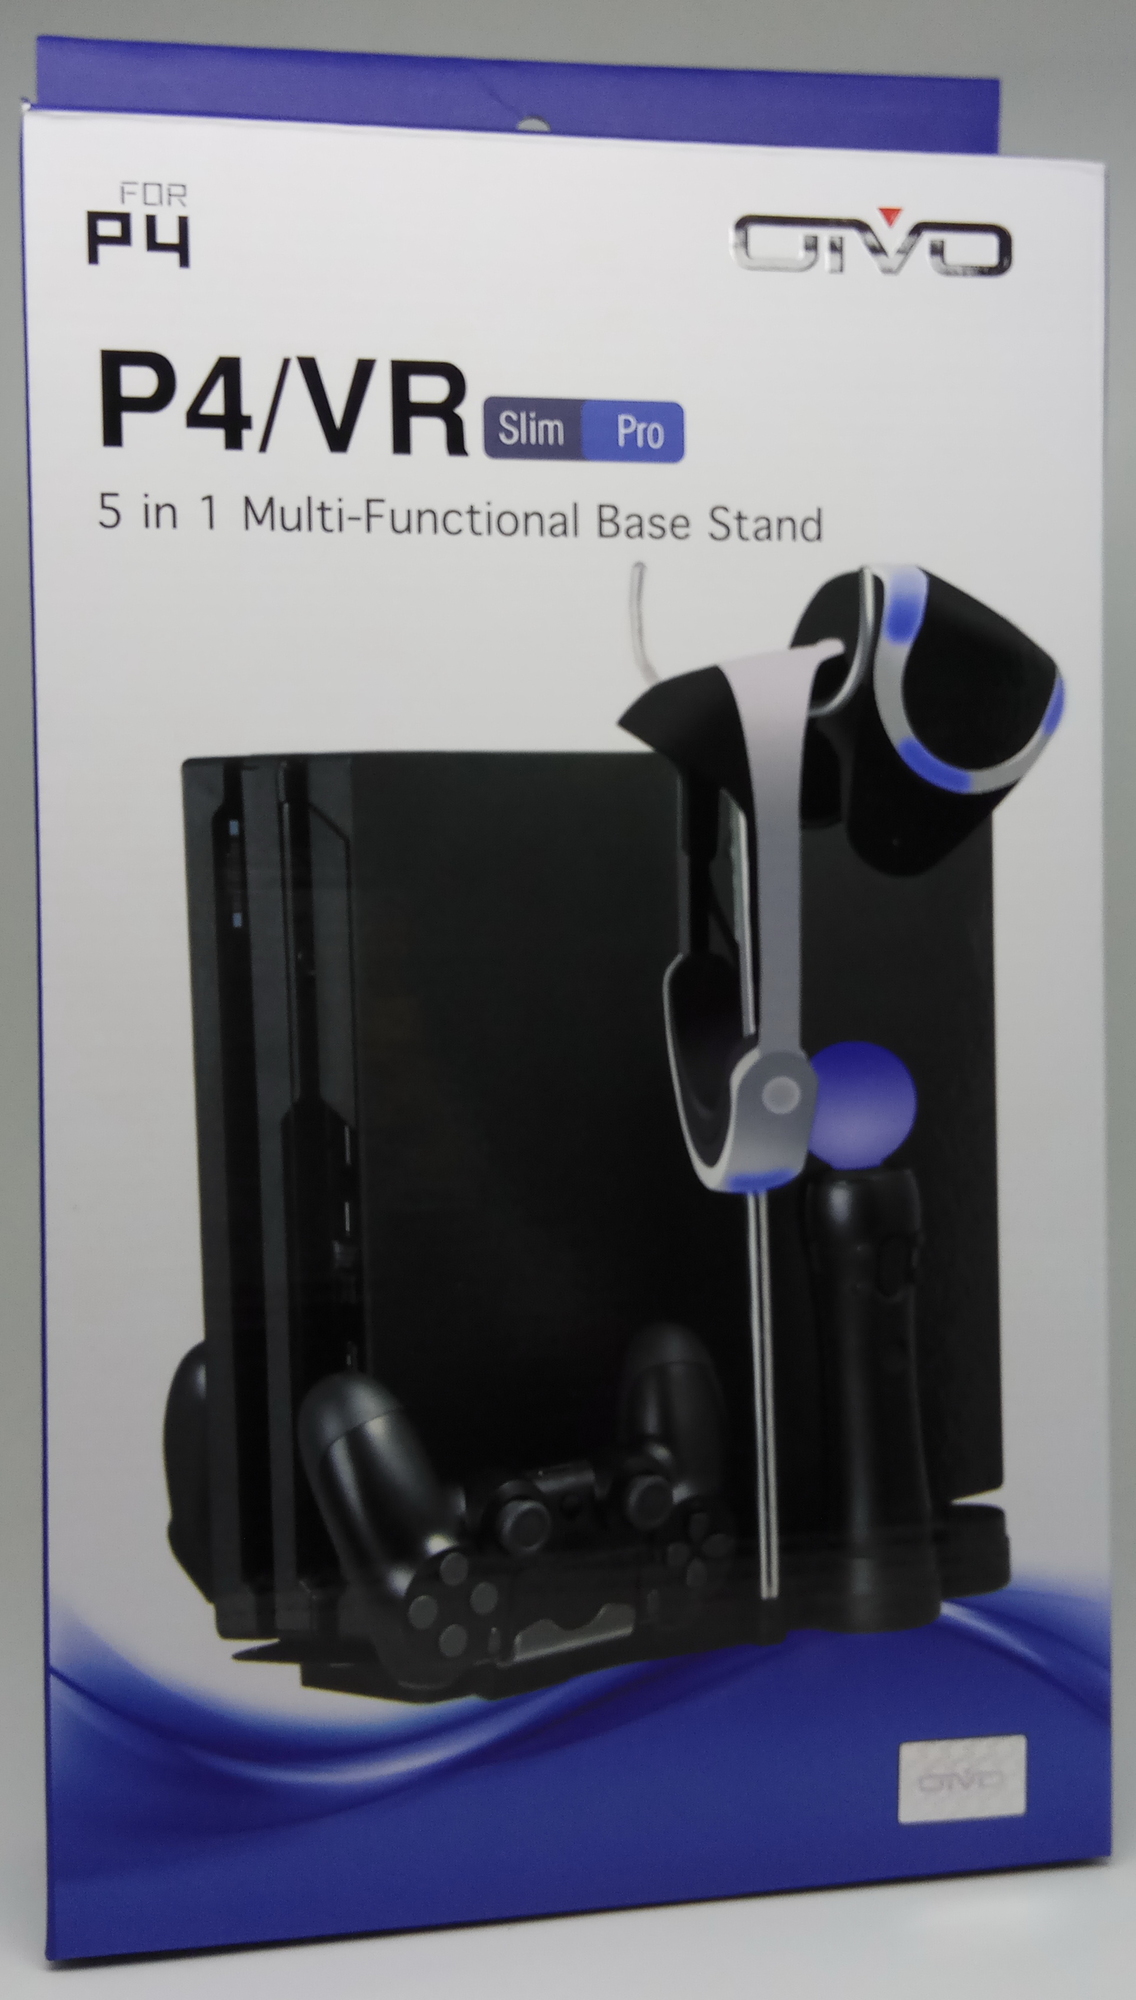 PS4-OIVO VR Slim/Pro 5in1 Multi-Functional Stand(IV-P4S